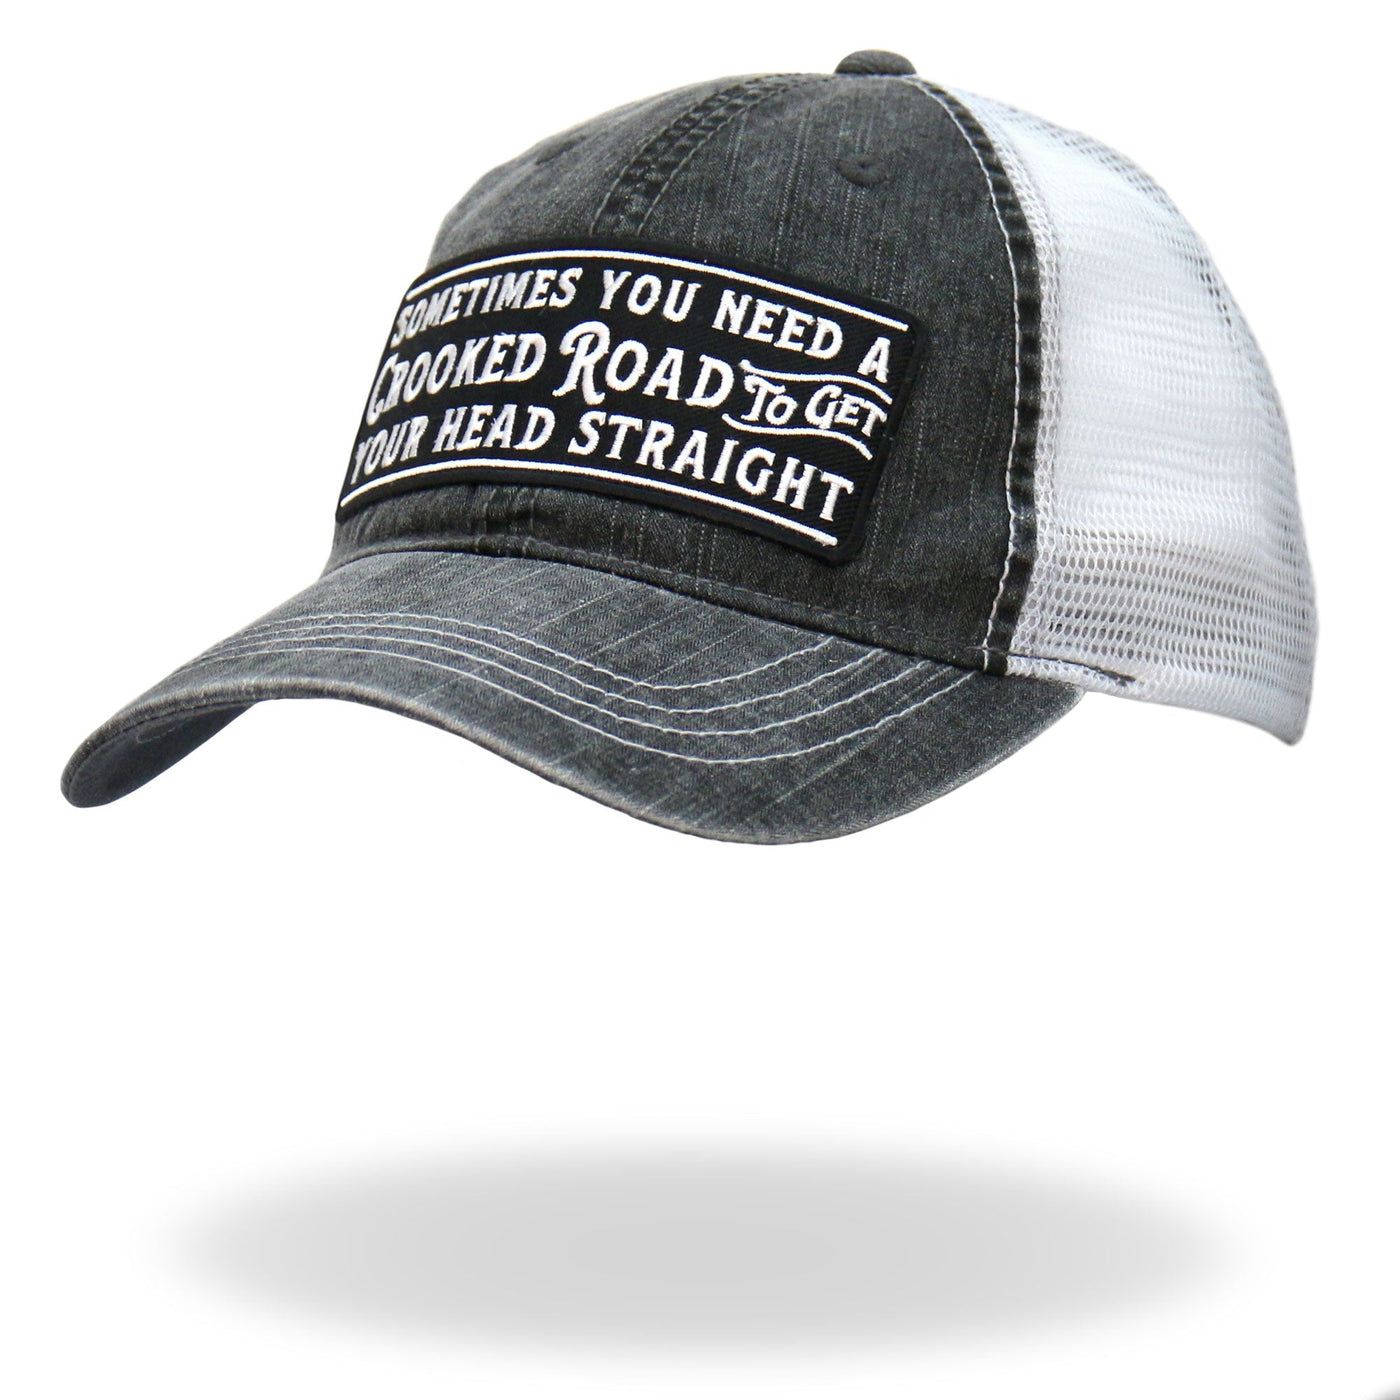 Hot Leathers Crooked Road Trucker Hat